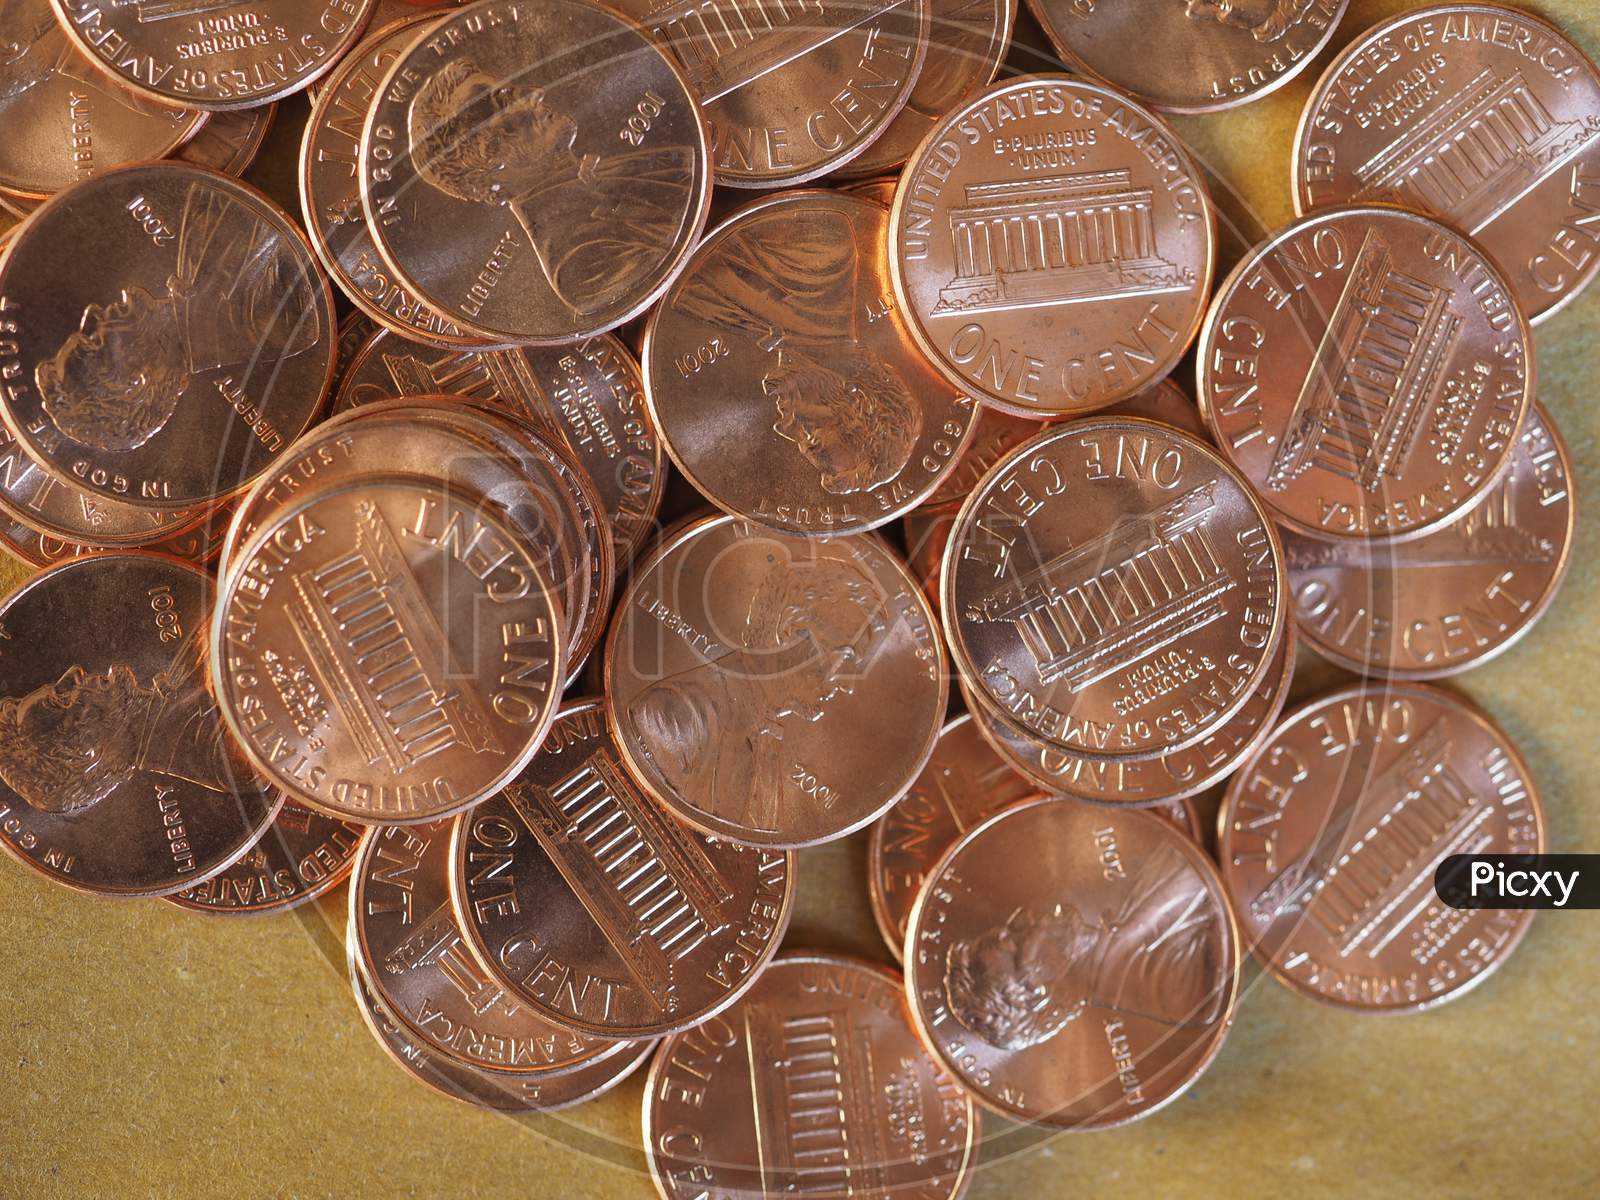 One Cent Dollar Coins, United States